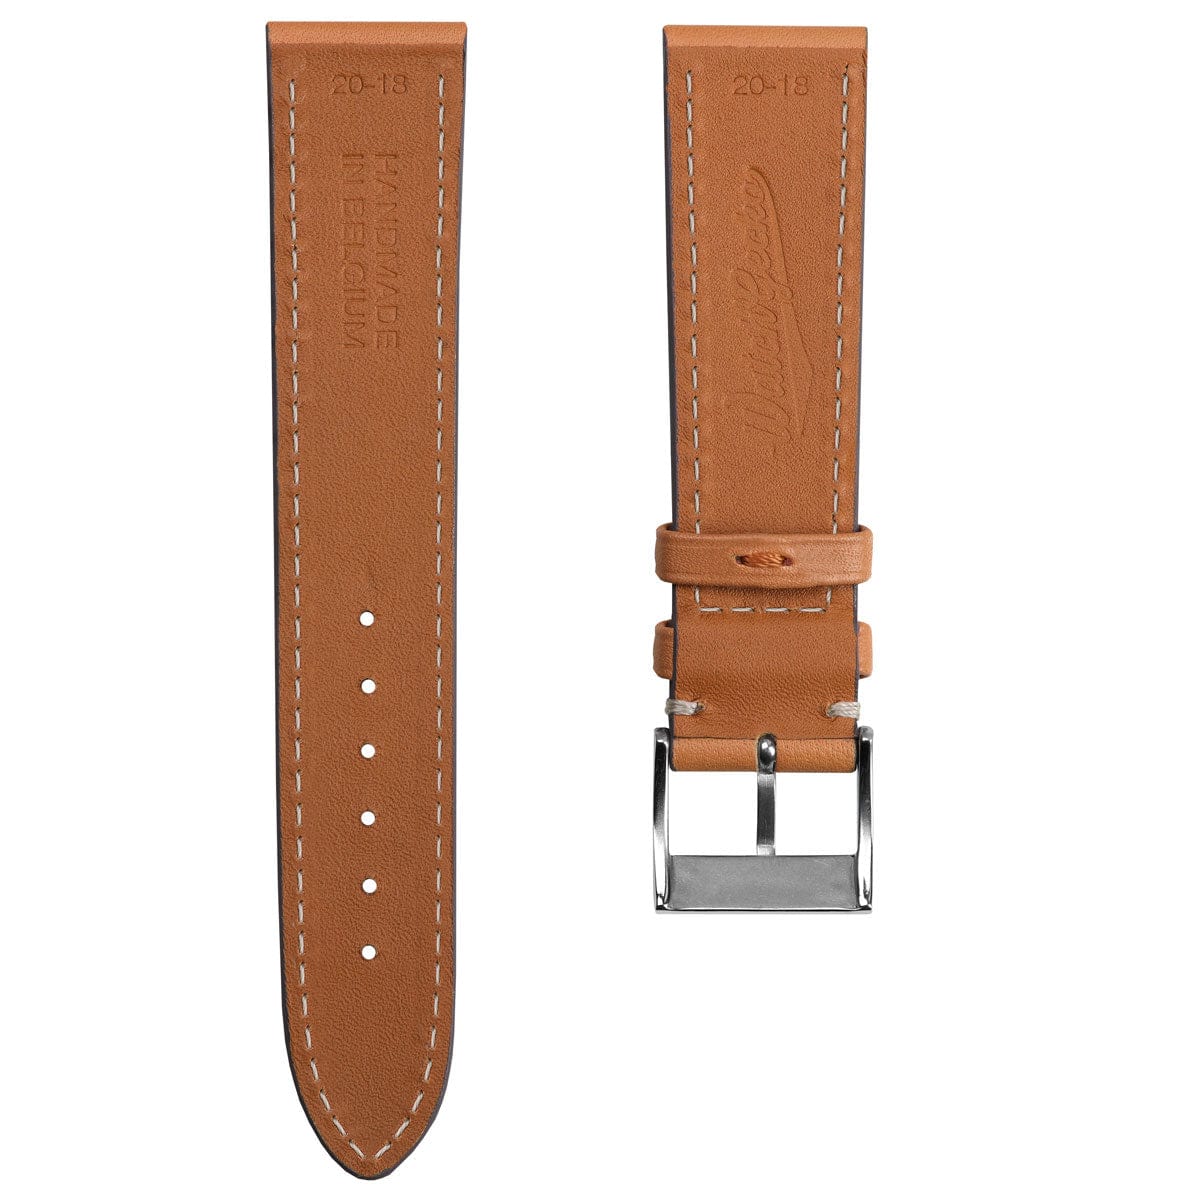 Ostend Baranil Flat Leather Watch Strap - Gold